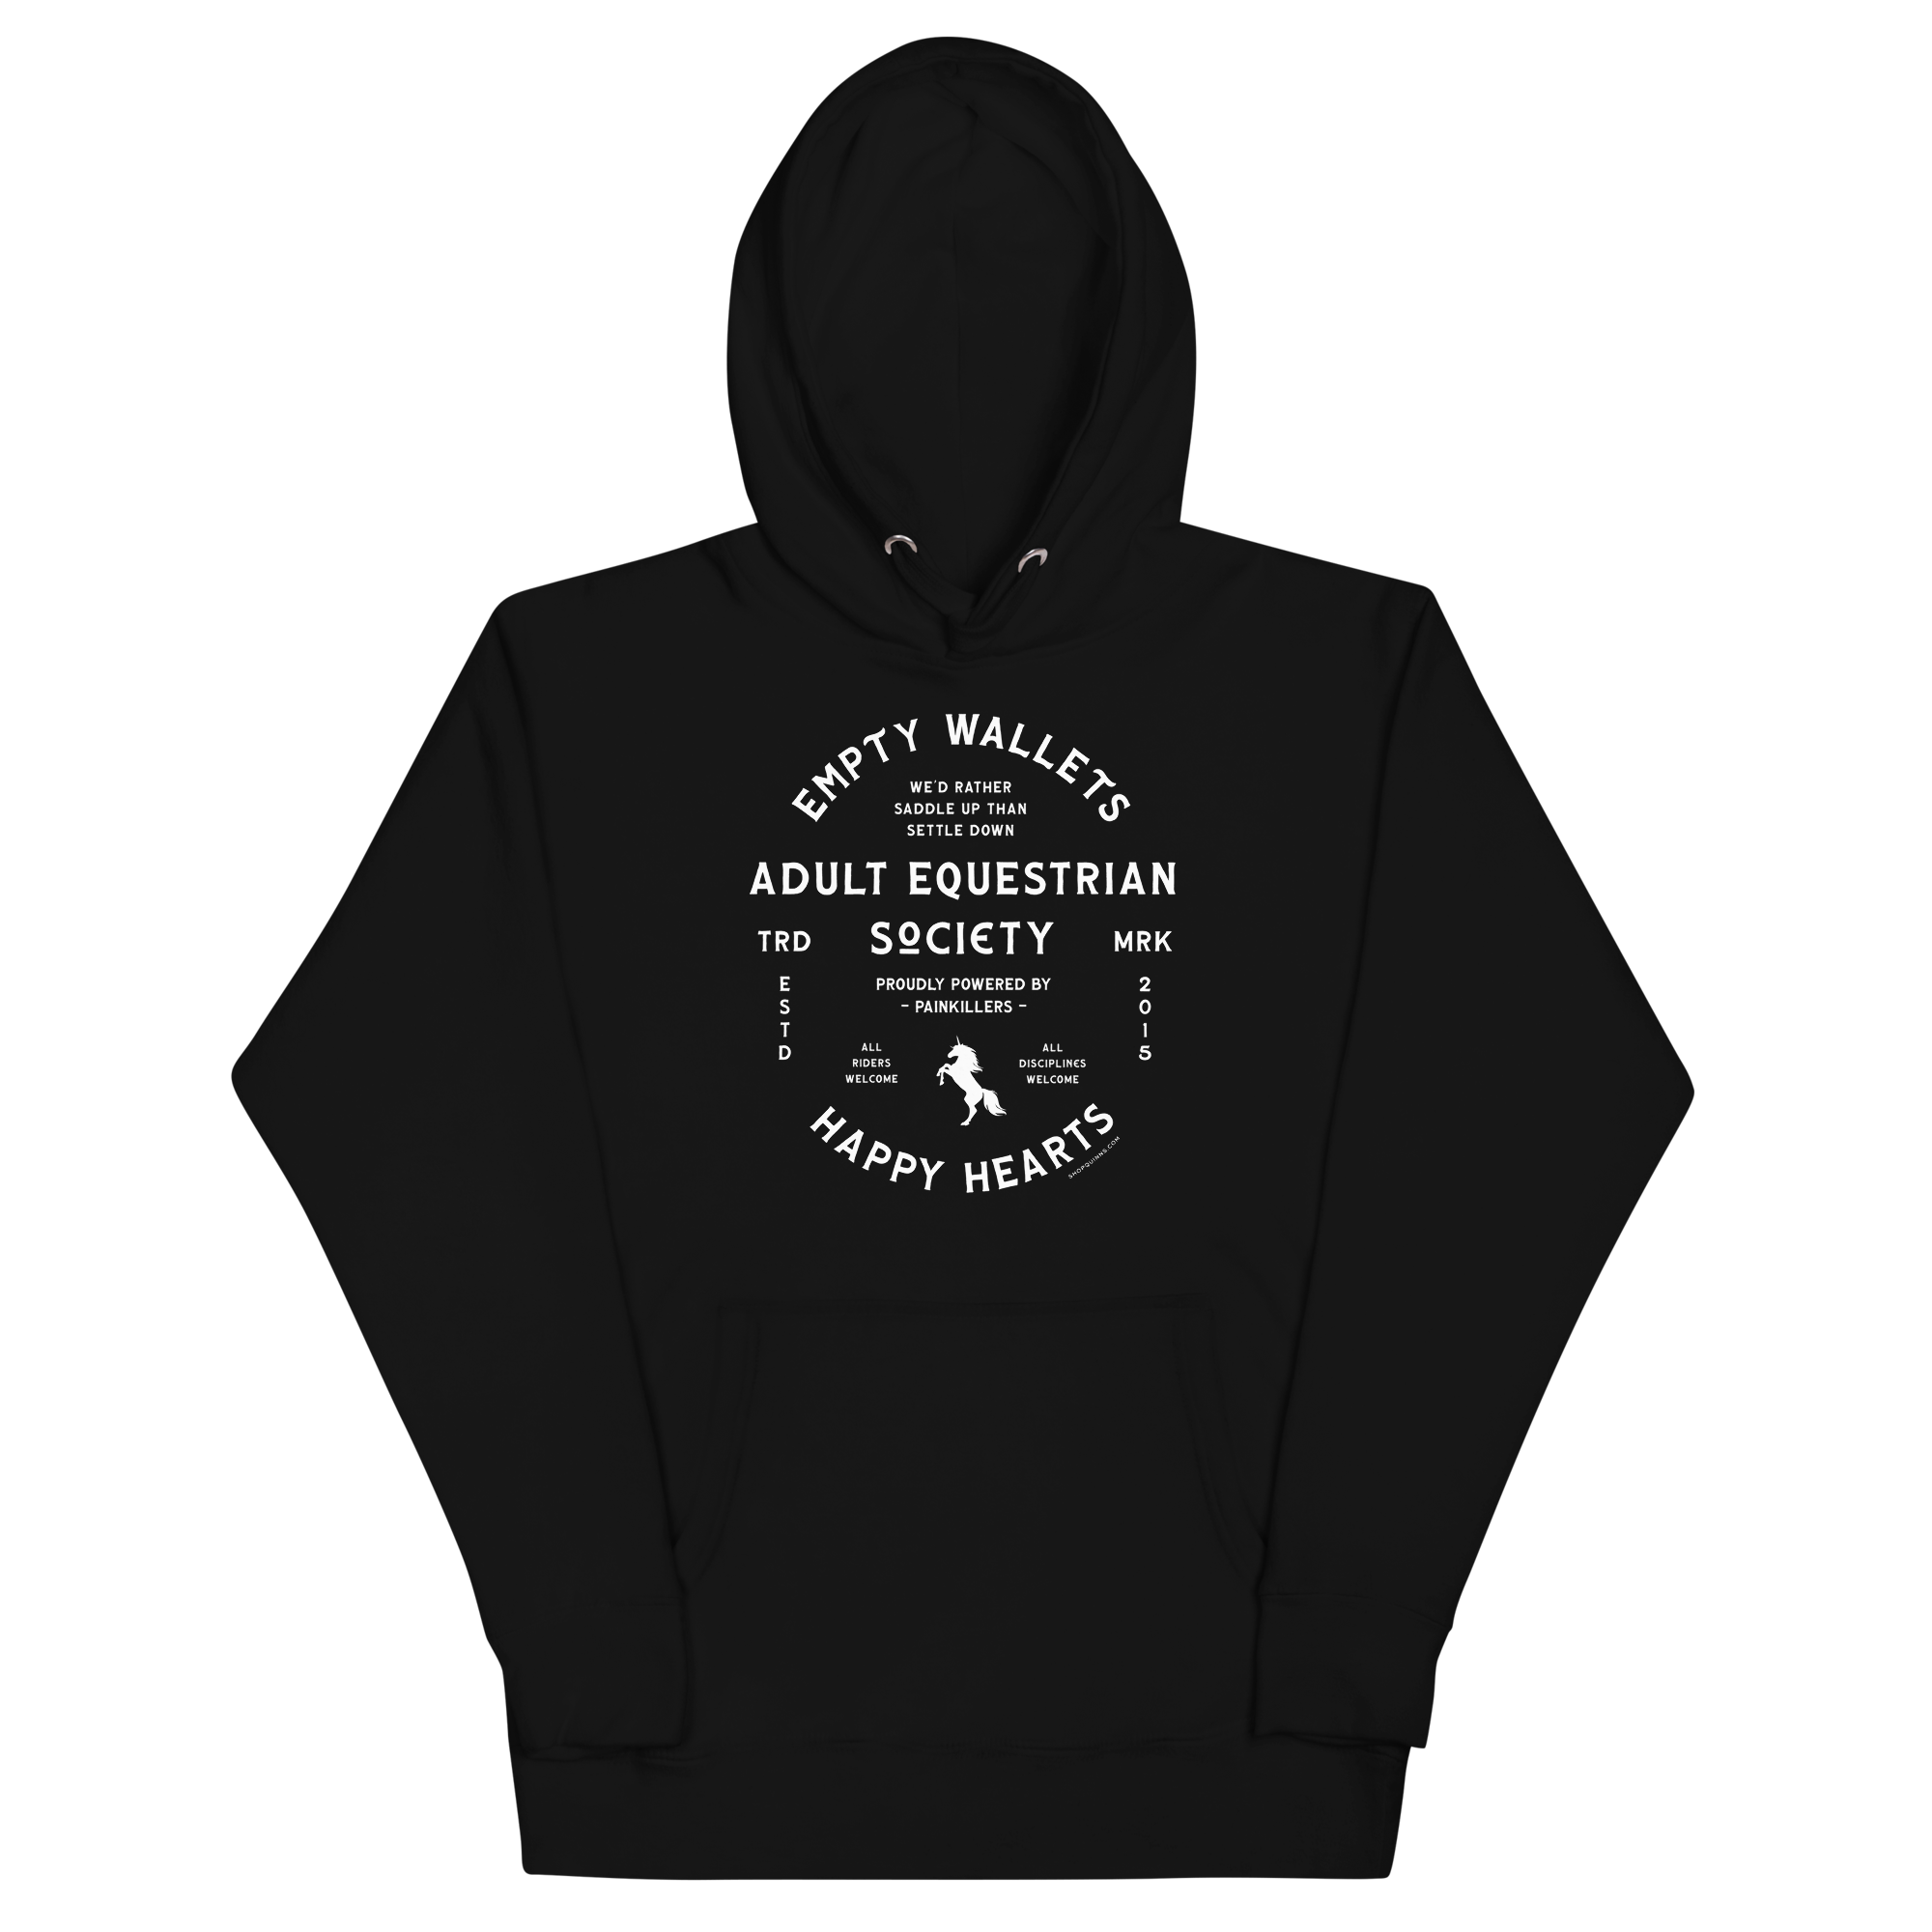 Adult Equestrian Society Hoodie - White